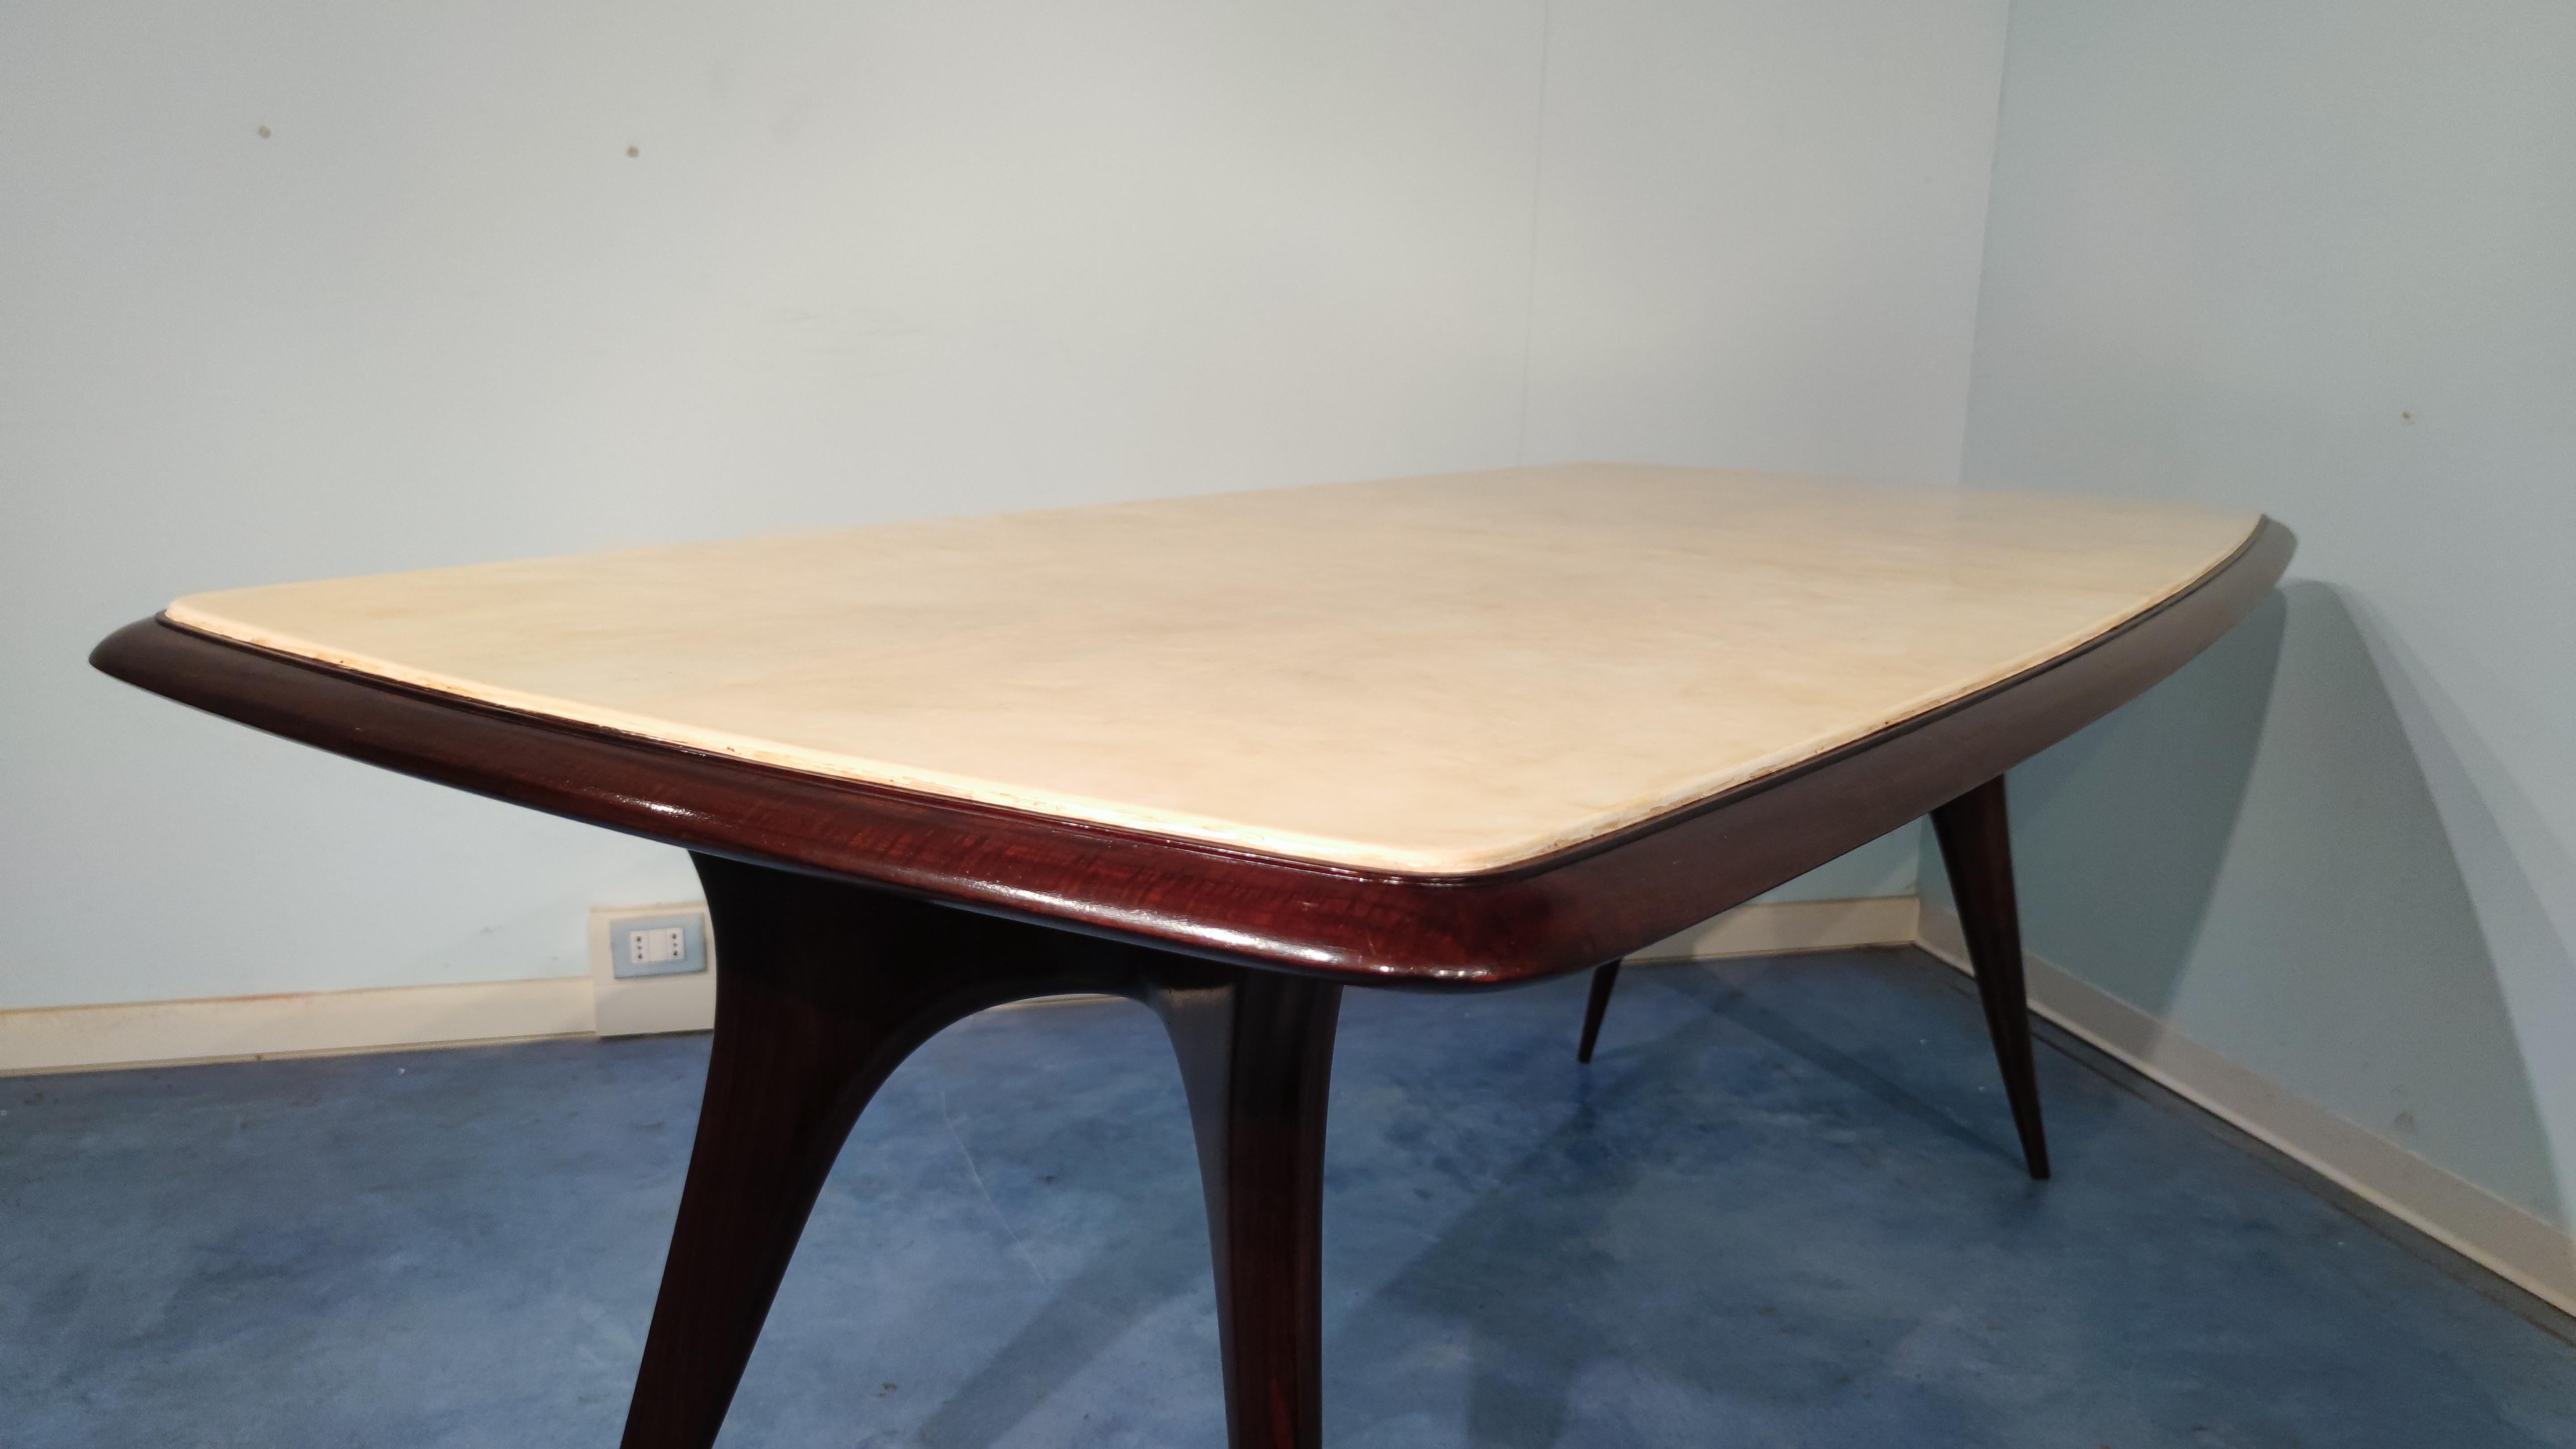 Walnut Italian Mid-Century Parchment Dining Table Attributed to Guglielmo Ulrich, 1950s For Sale